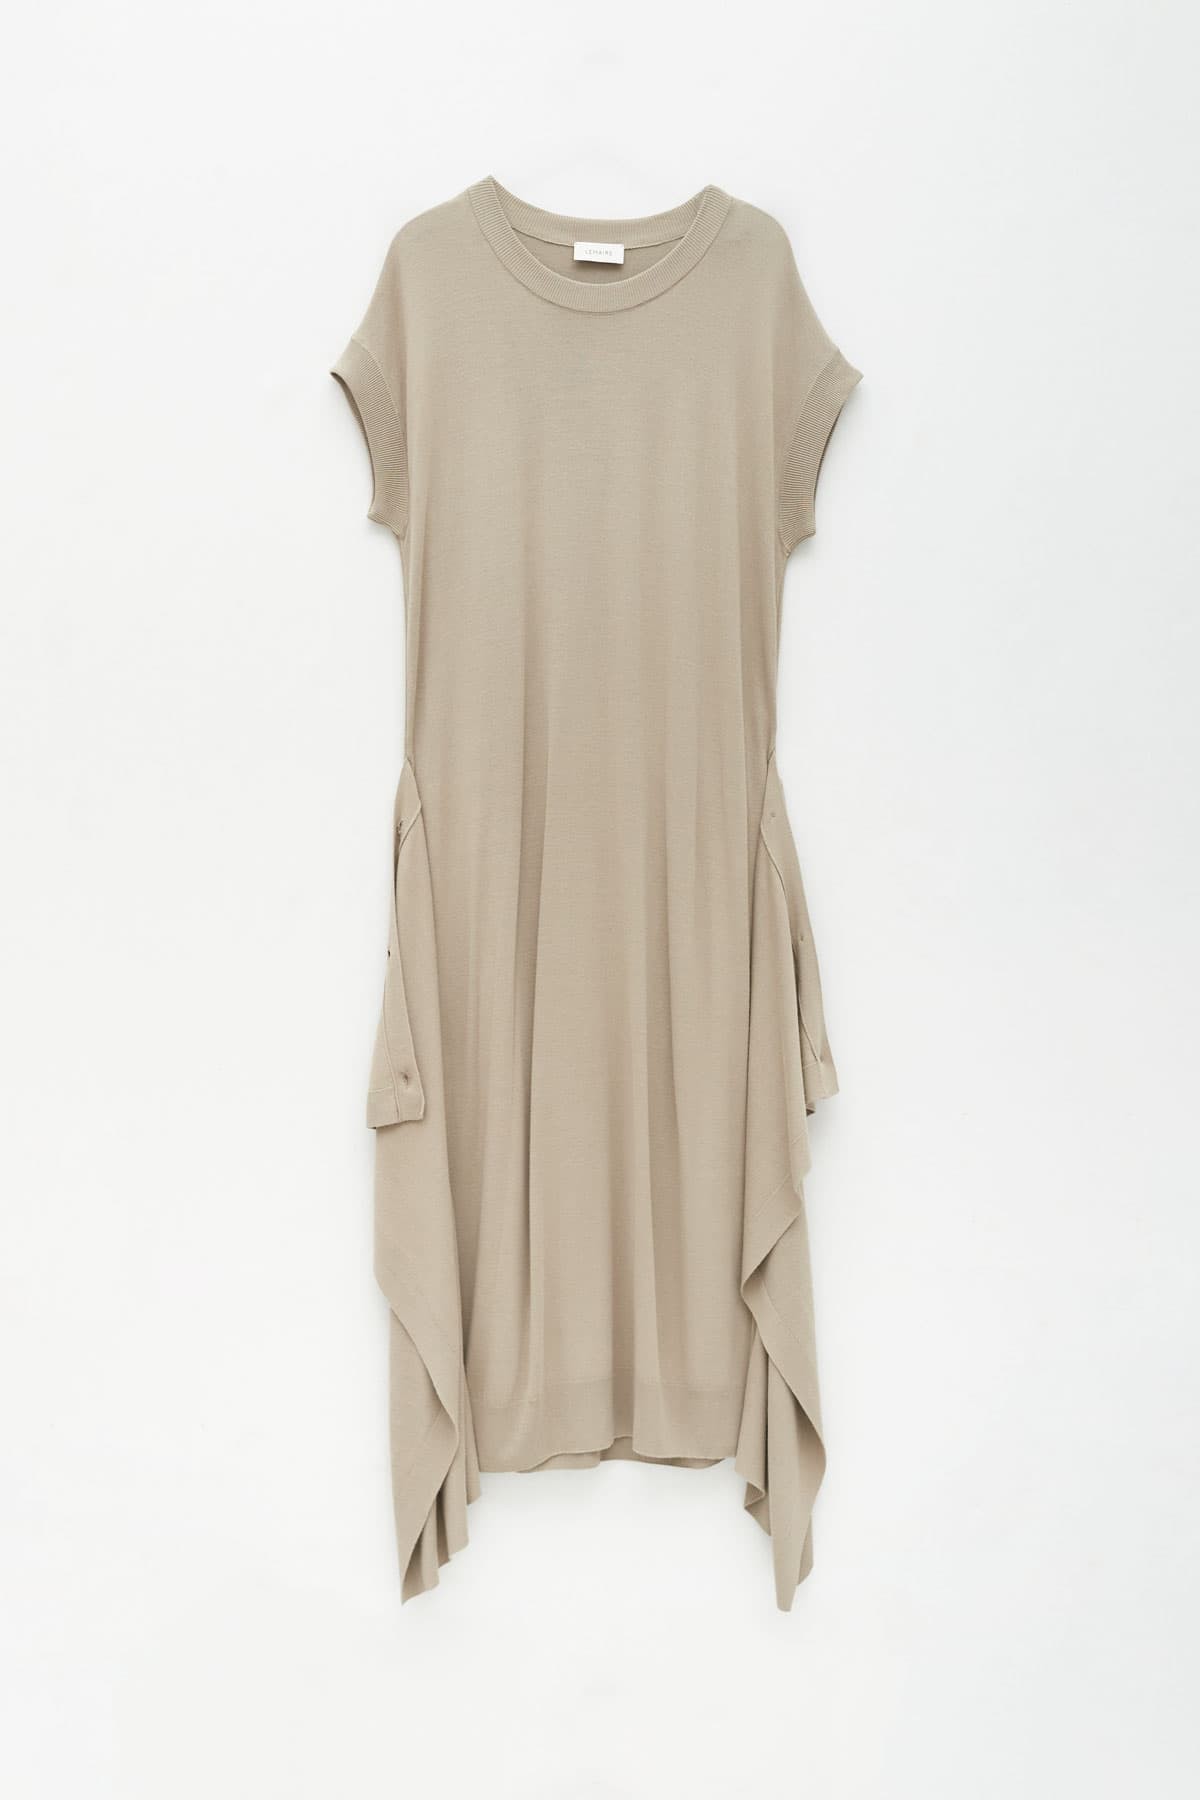 LEMAIRE LIGHT TAUPE DOUBLE LAYER SKIRT DRESS IAMNUE